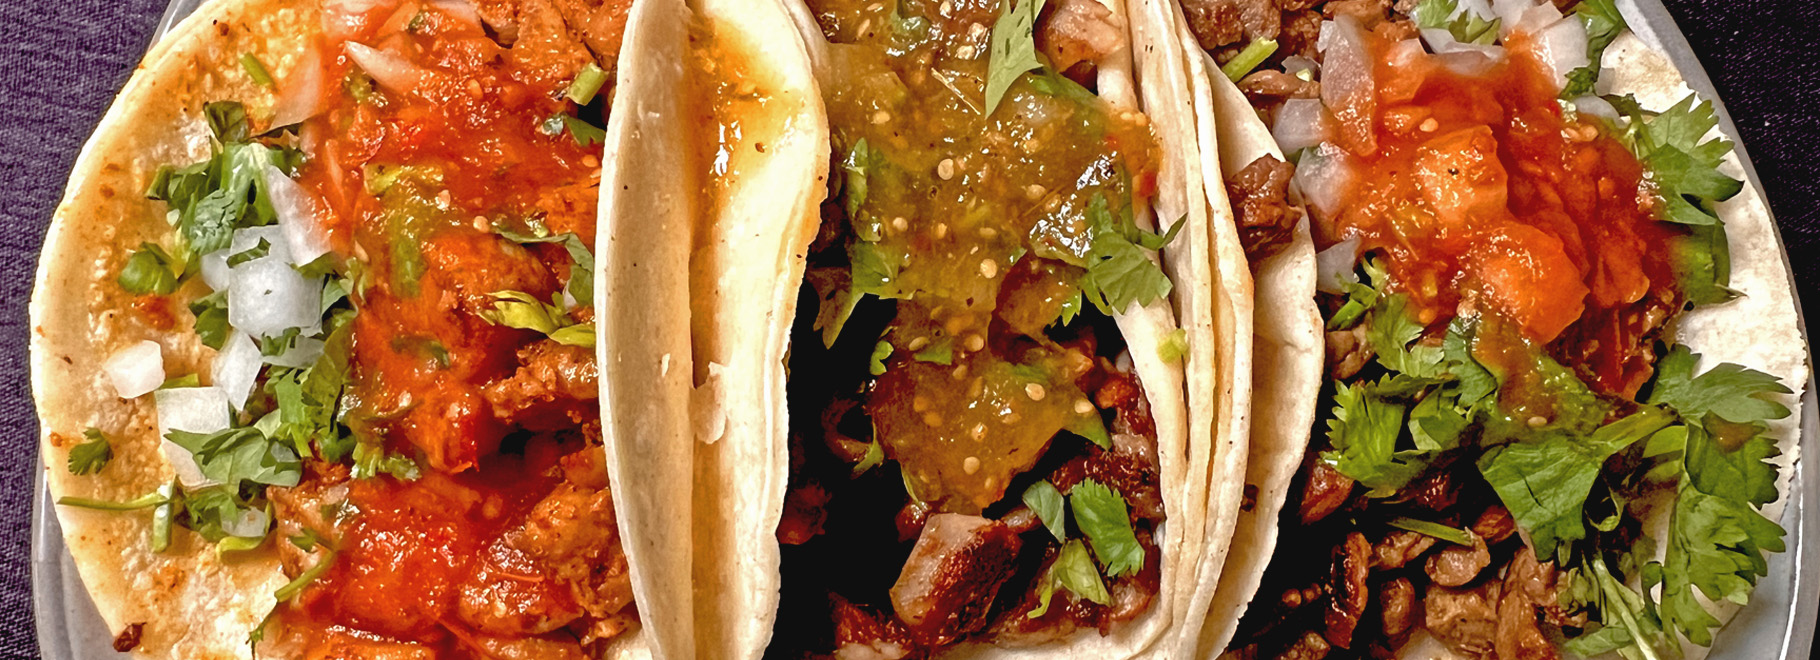 Three Tacos : Asada, Grilled Chicken, and Buche